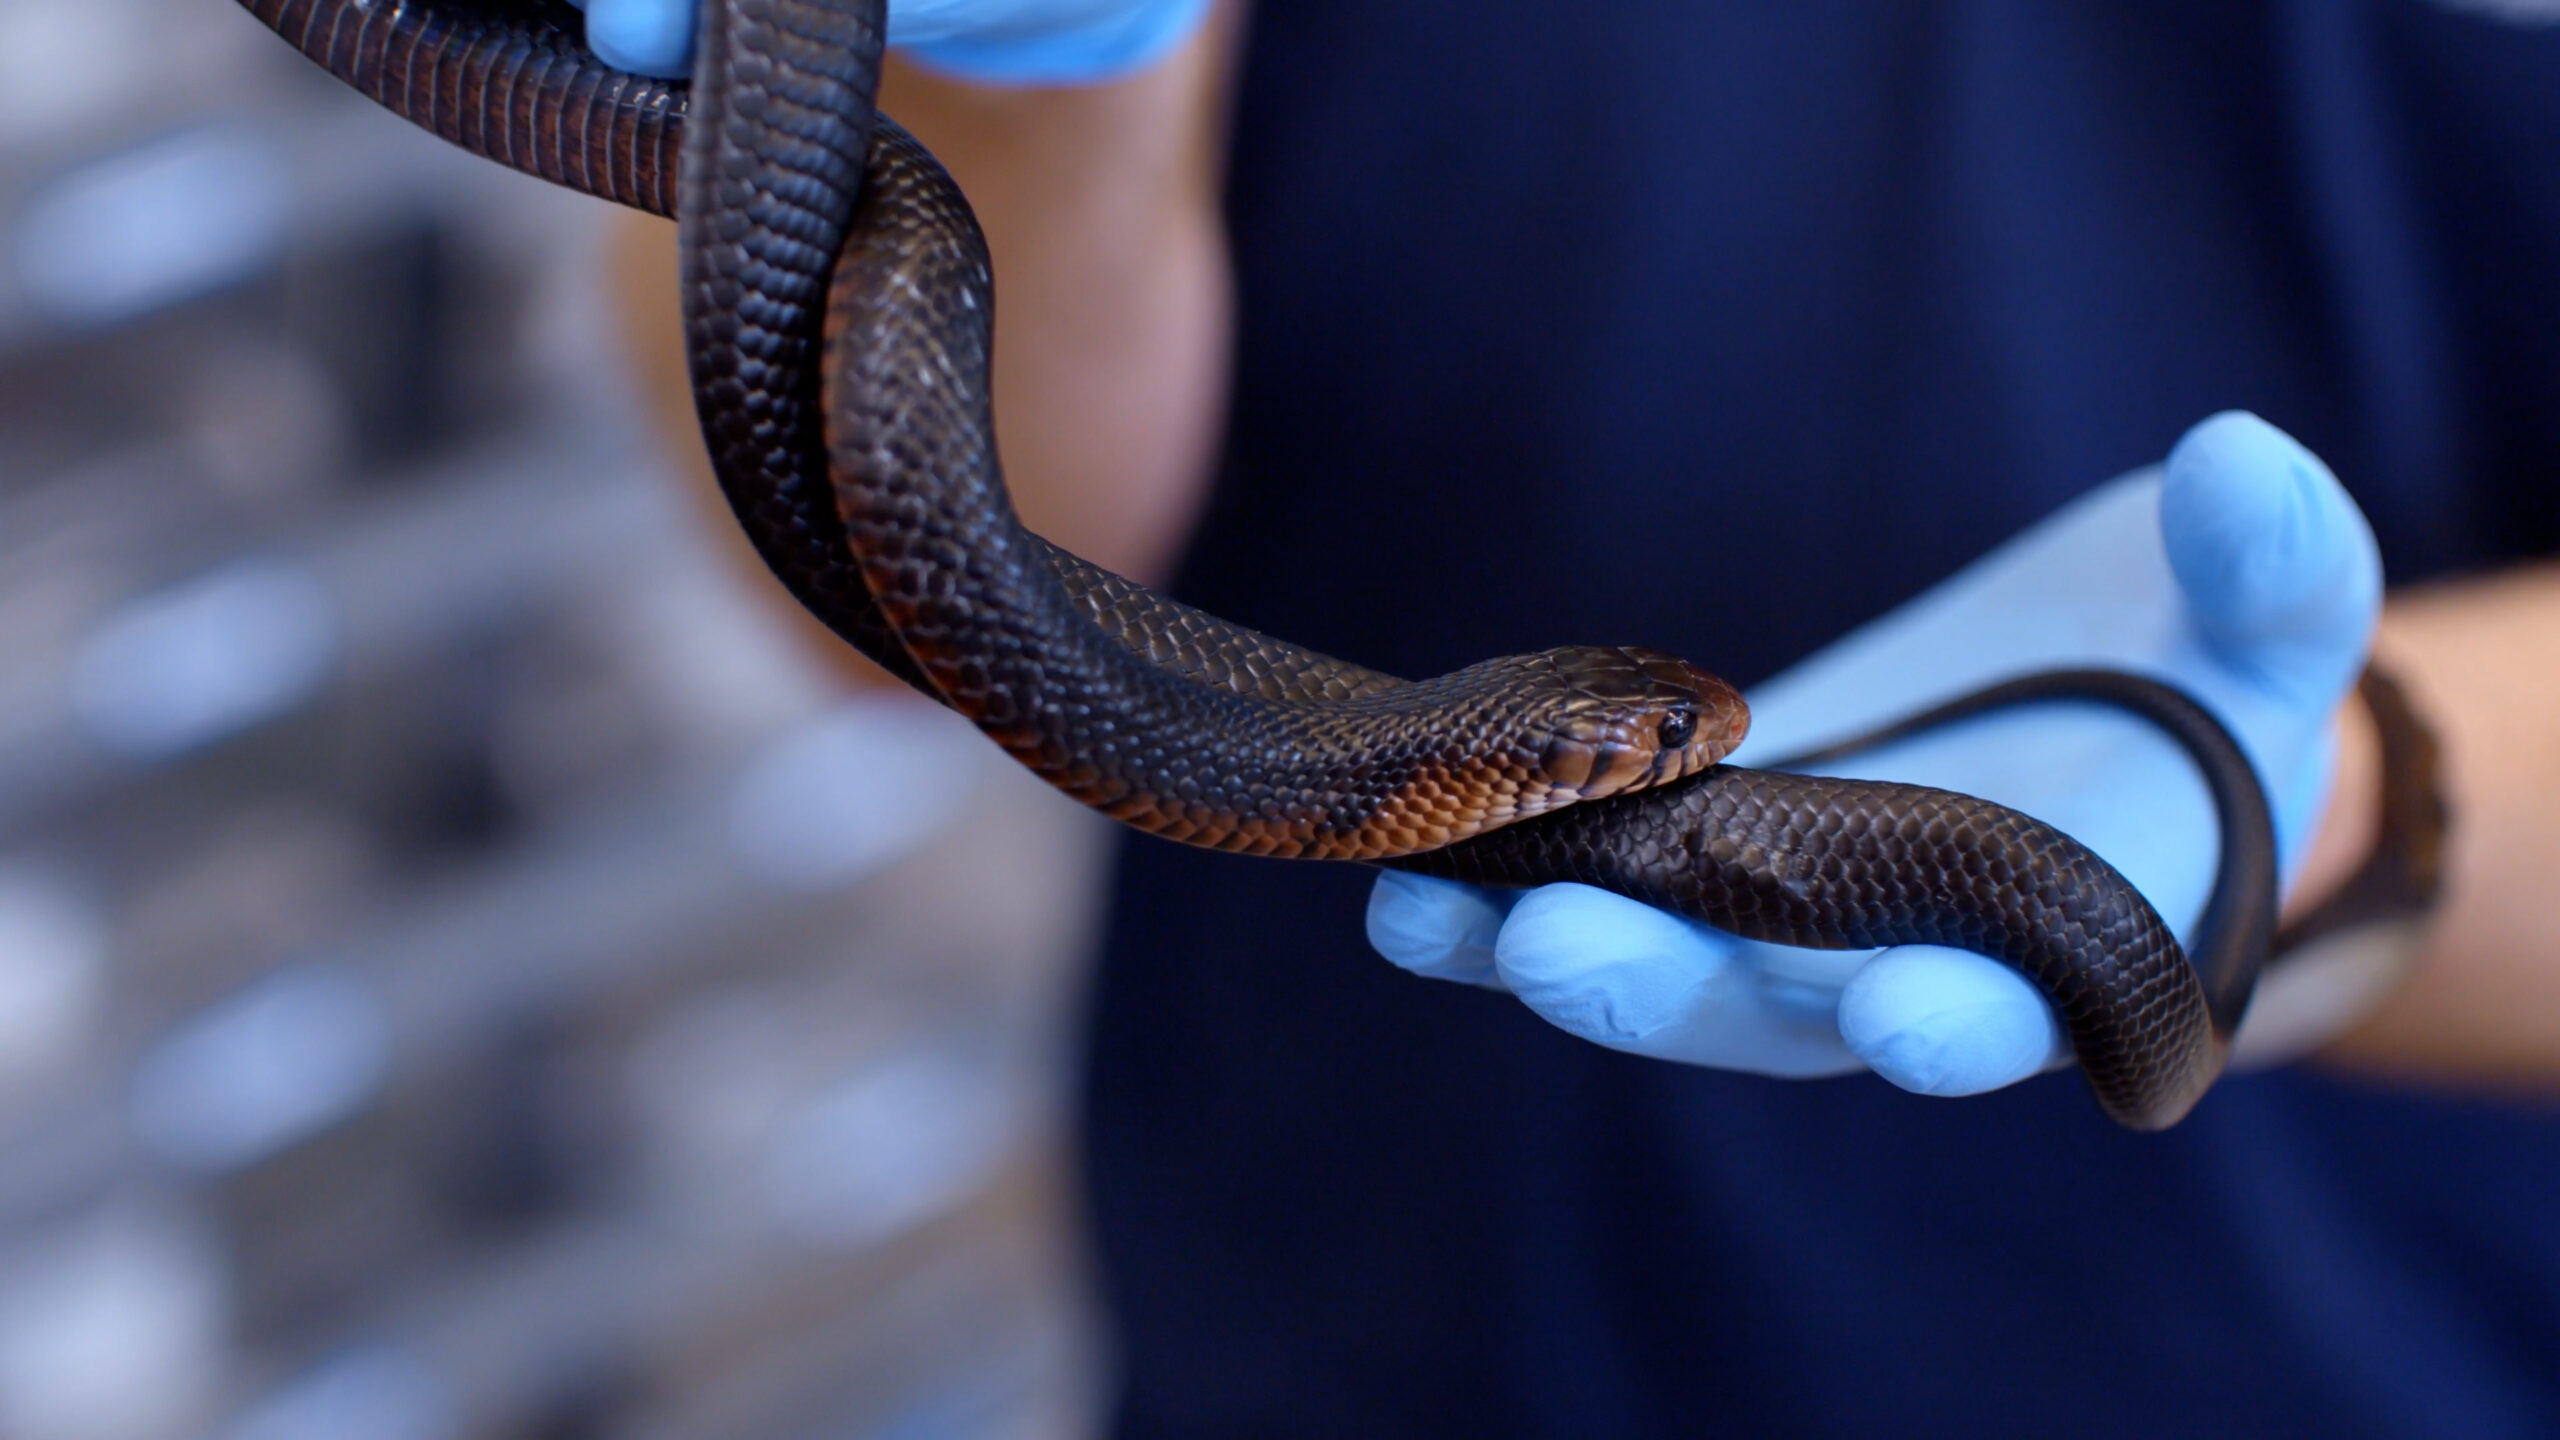 Two glove-covered hands hold a blue snake with an orange belly that is braiding around itself.